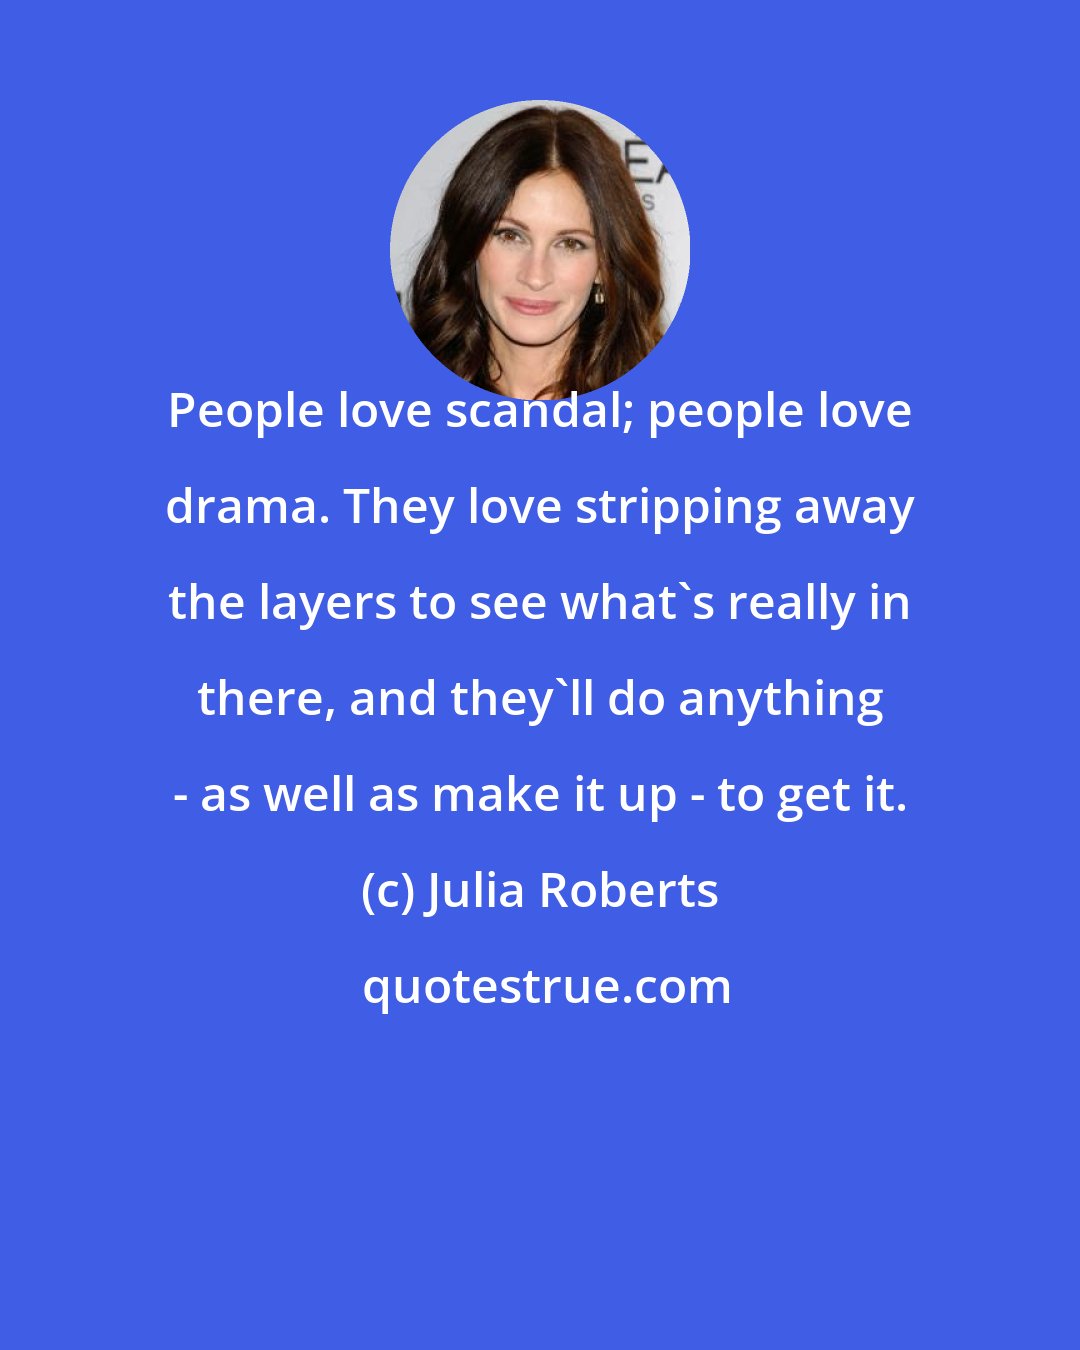 Julia Roberts: People love scandal; people love drama. They love stripping away the layers to see what's really in there, and they'll do anything - as well as make it up - to get it.